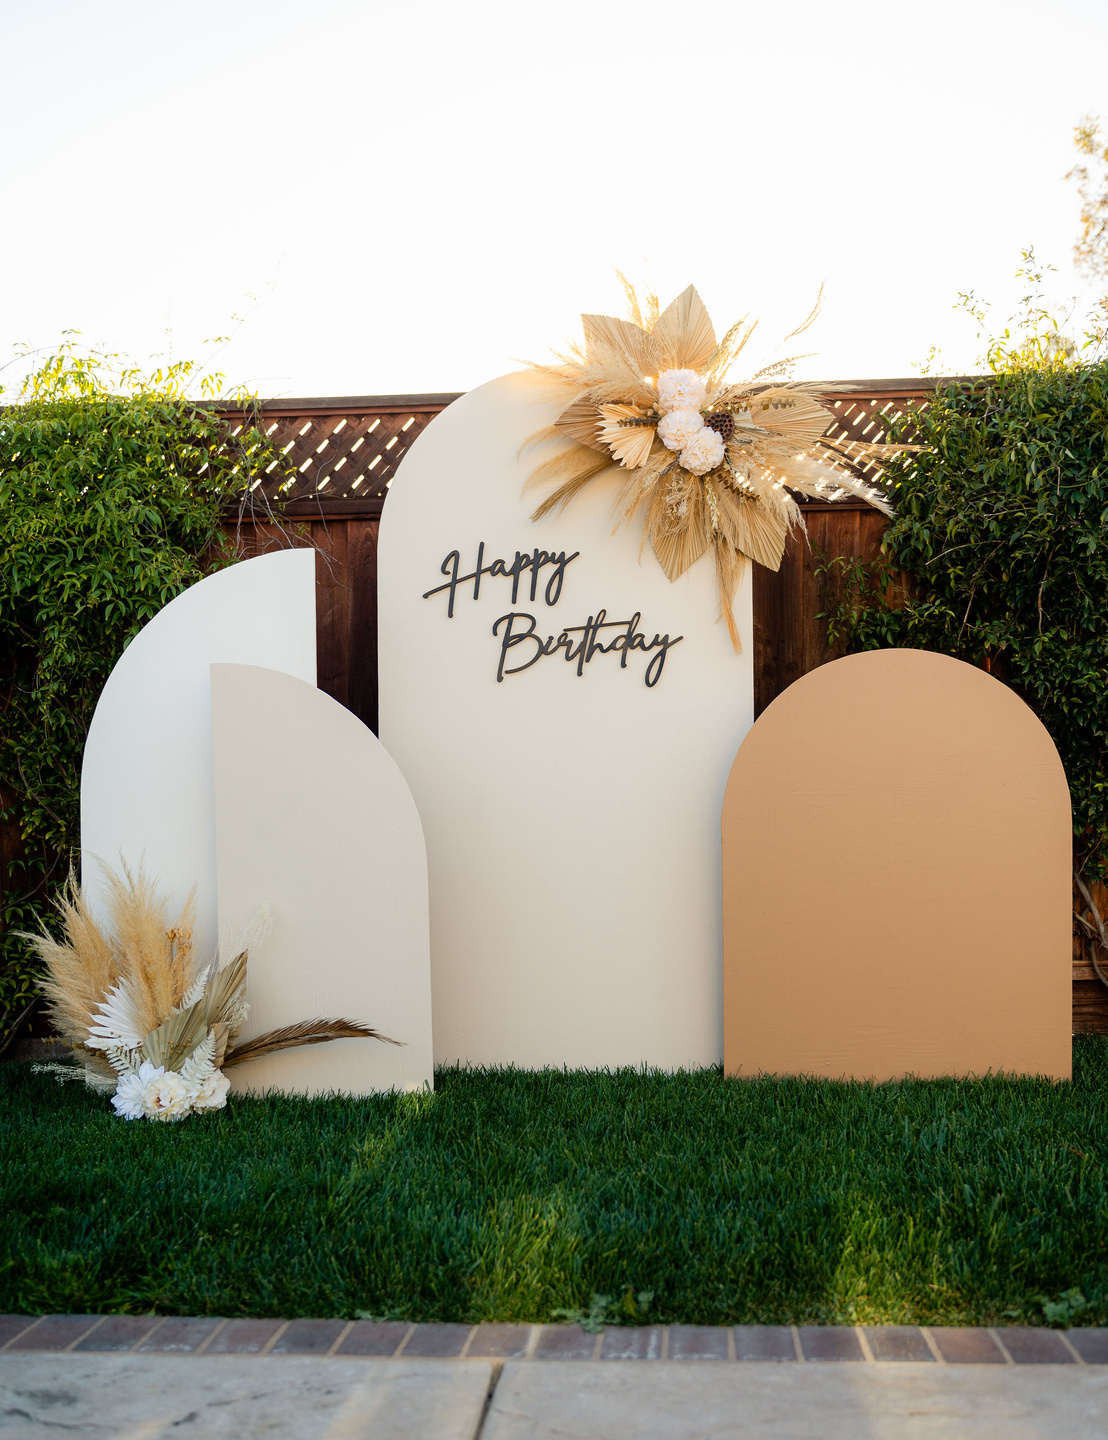 an outdoor birthday party with a arch backdrop, dried flowers, and a sign that says happy birthday. Can rent arches for all kinds of events